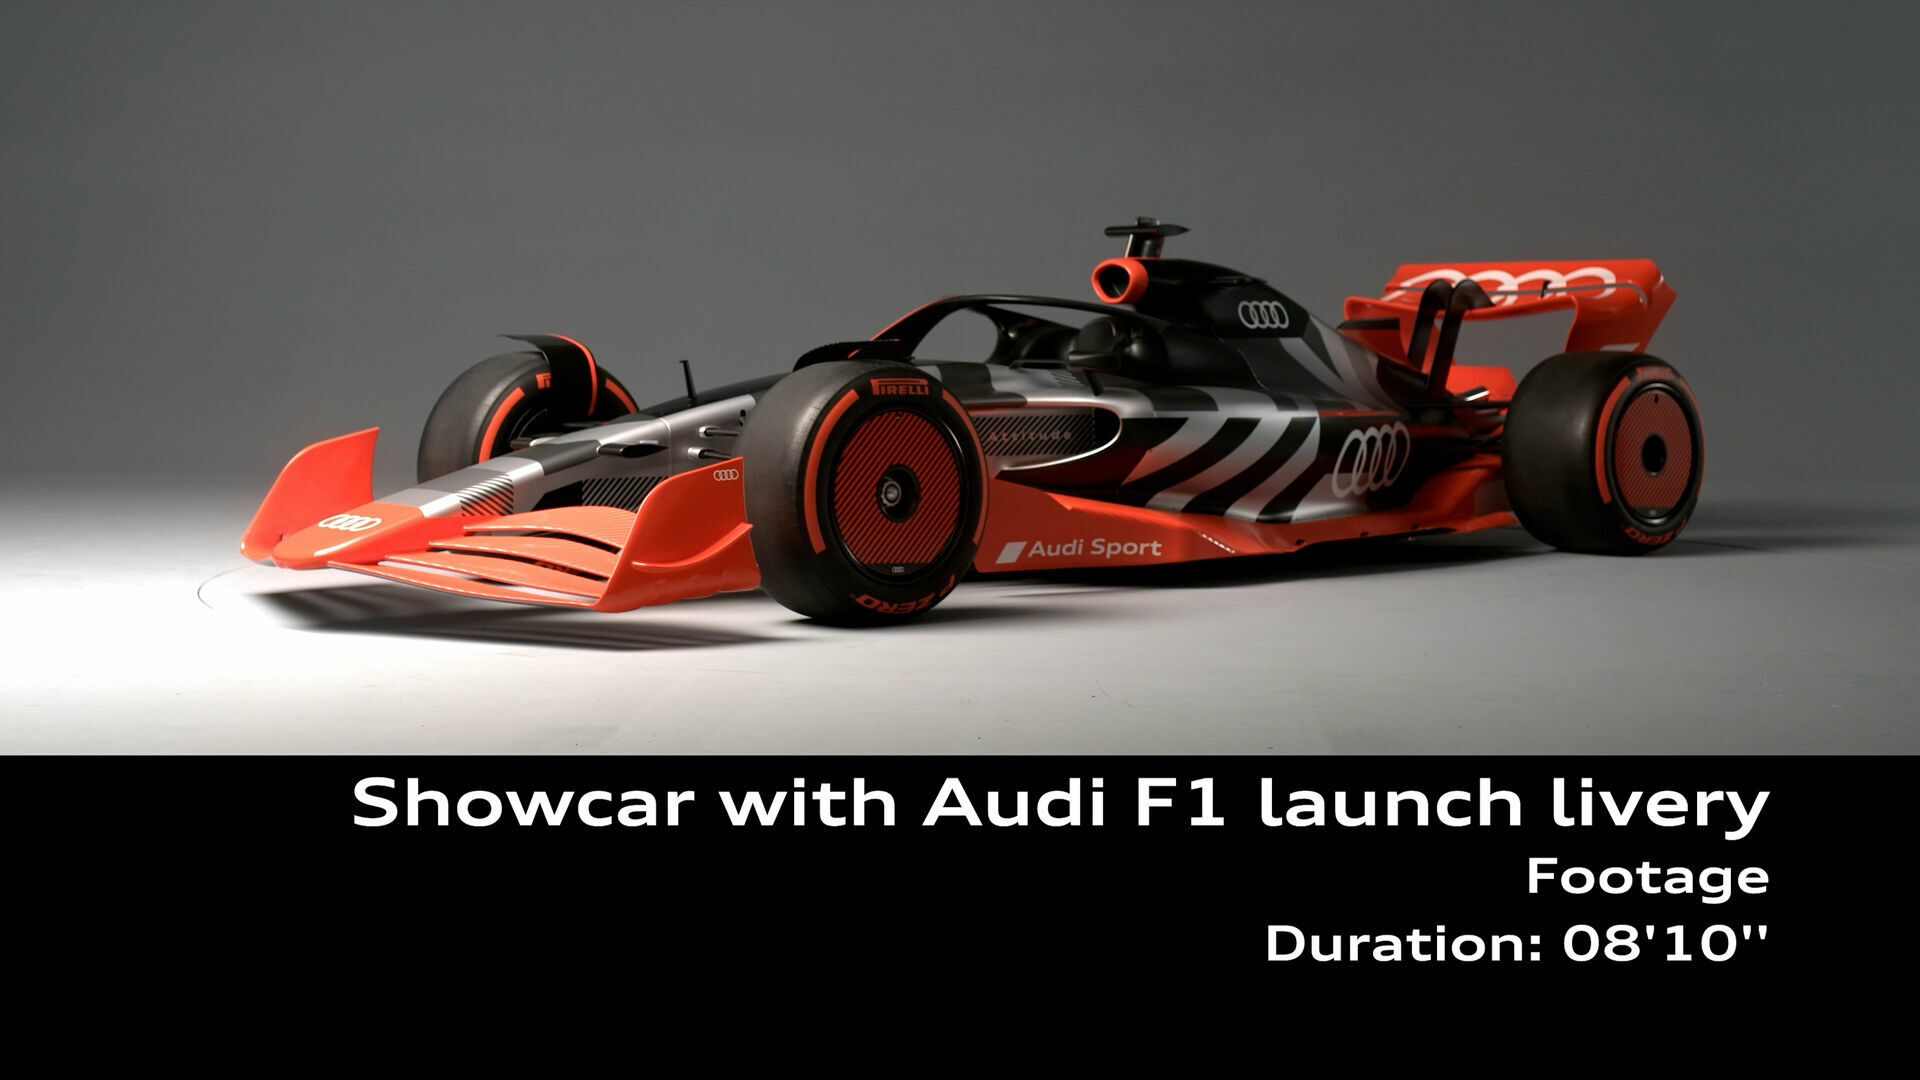 Footage: Showcar with Audi F1 launch livery